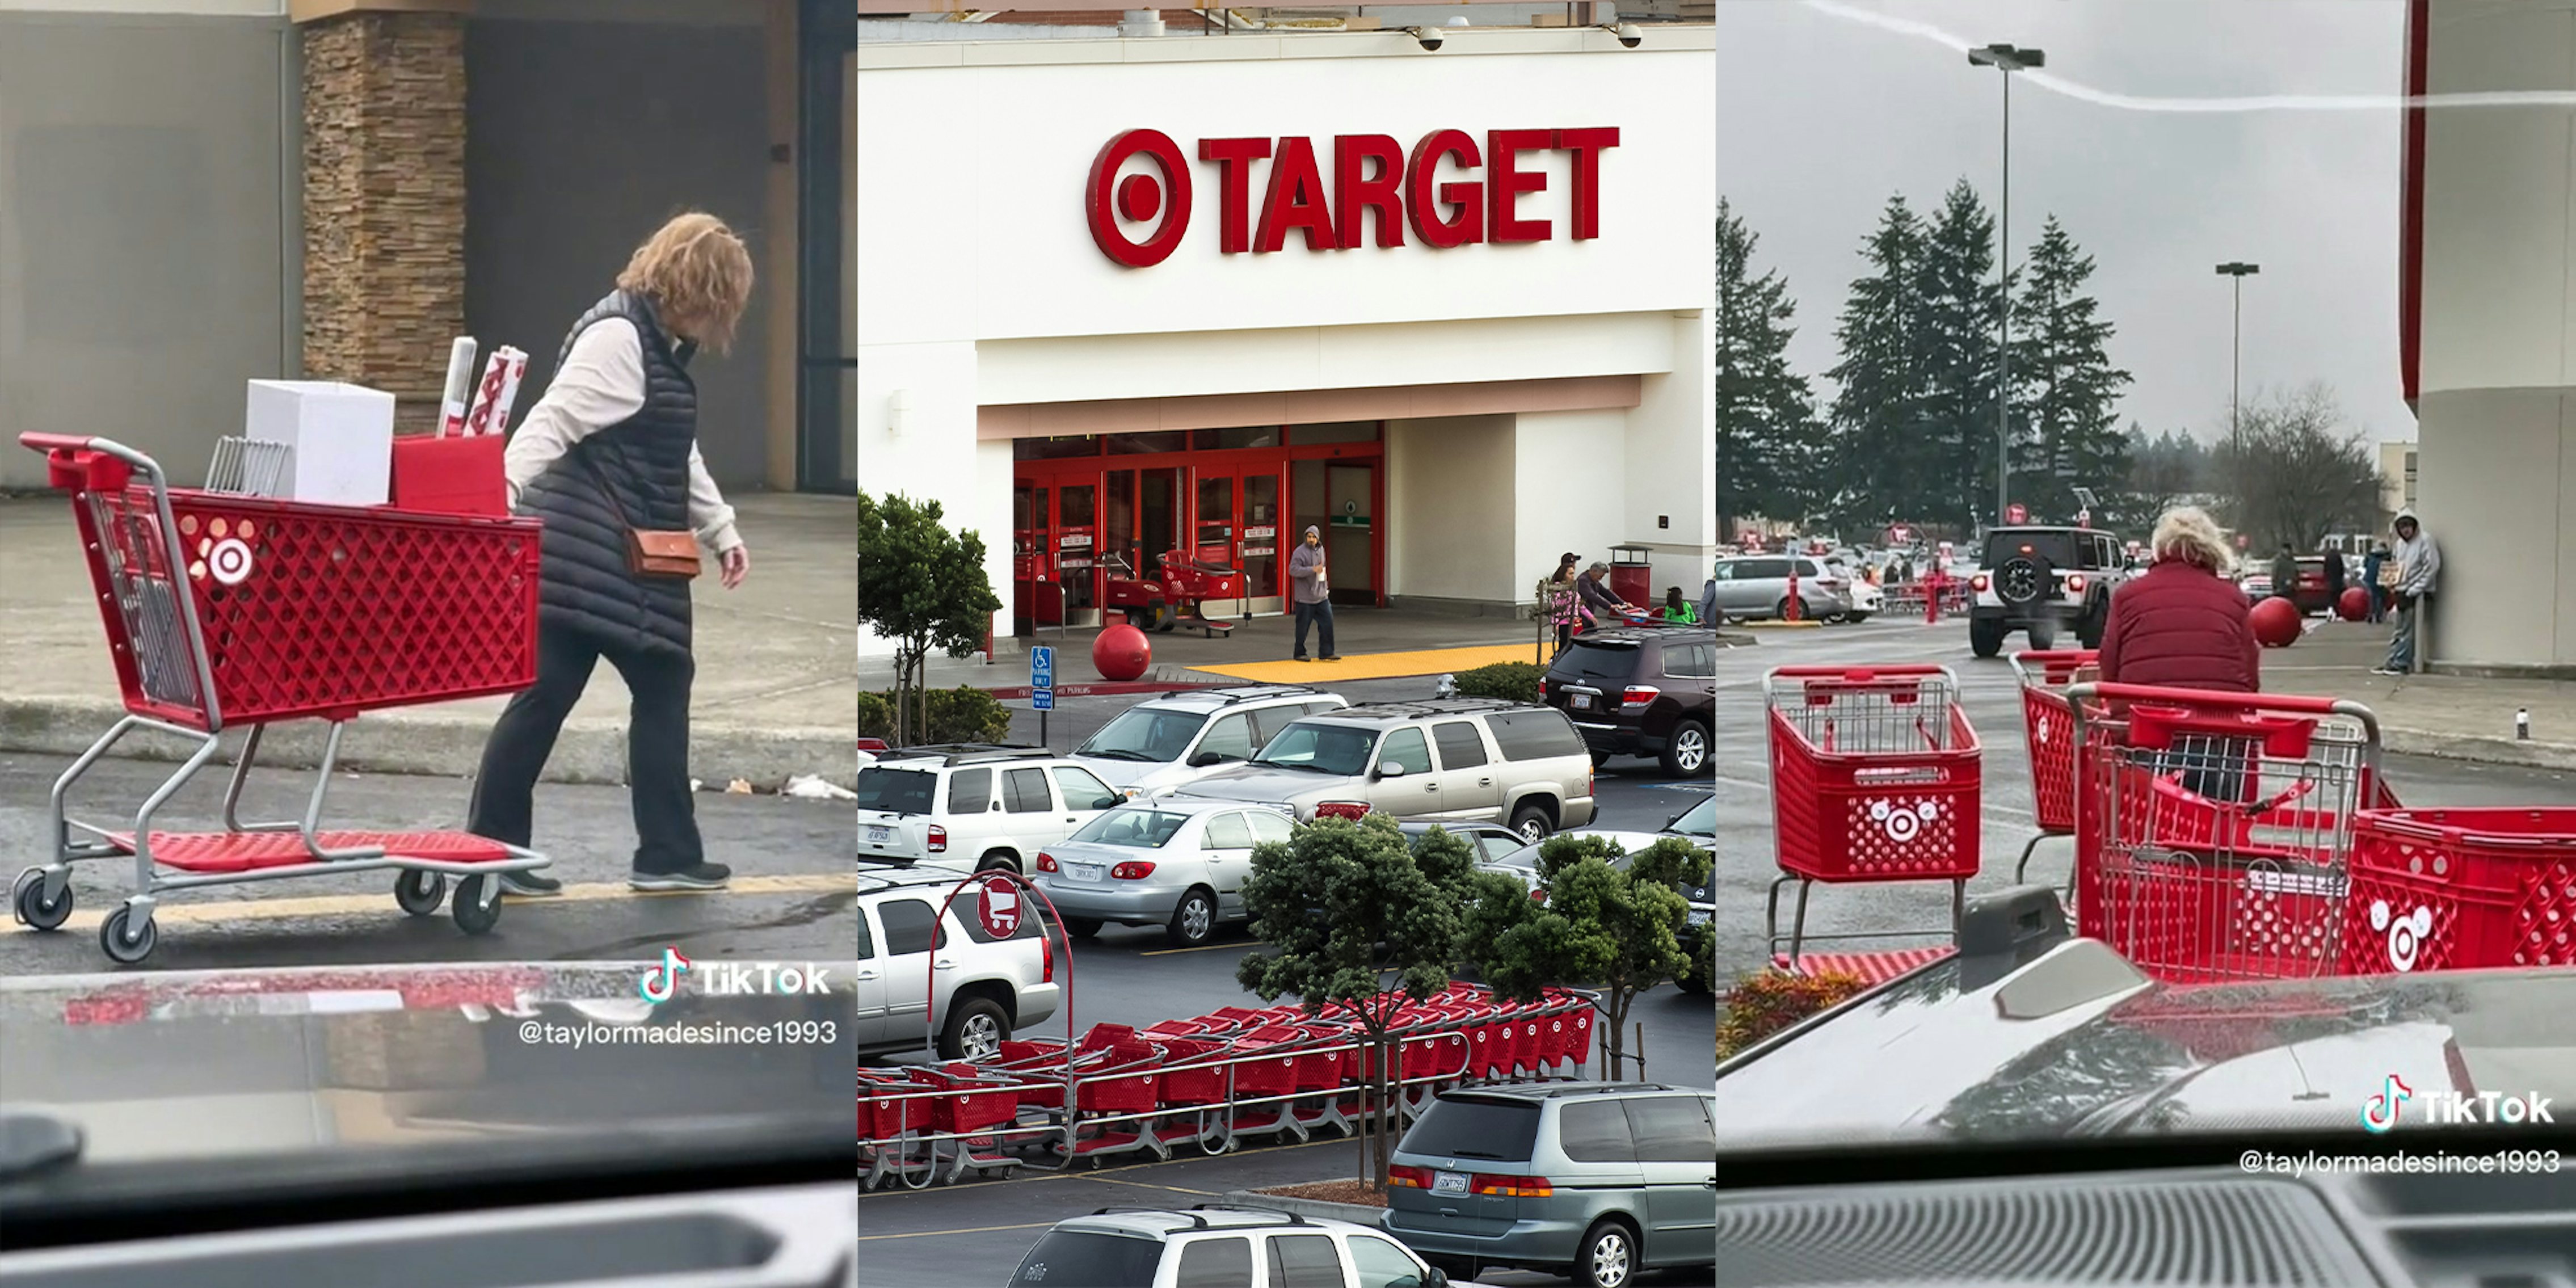 Target customers struggling with new anti-theft cart sensors in parking lot